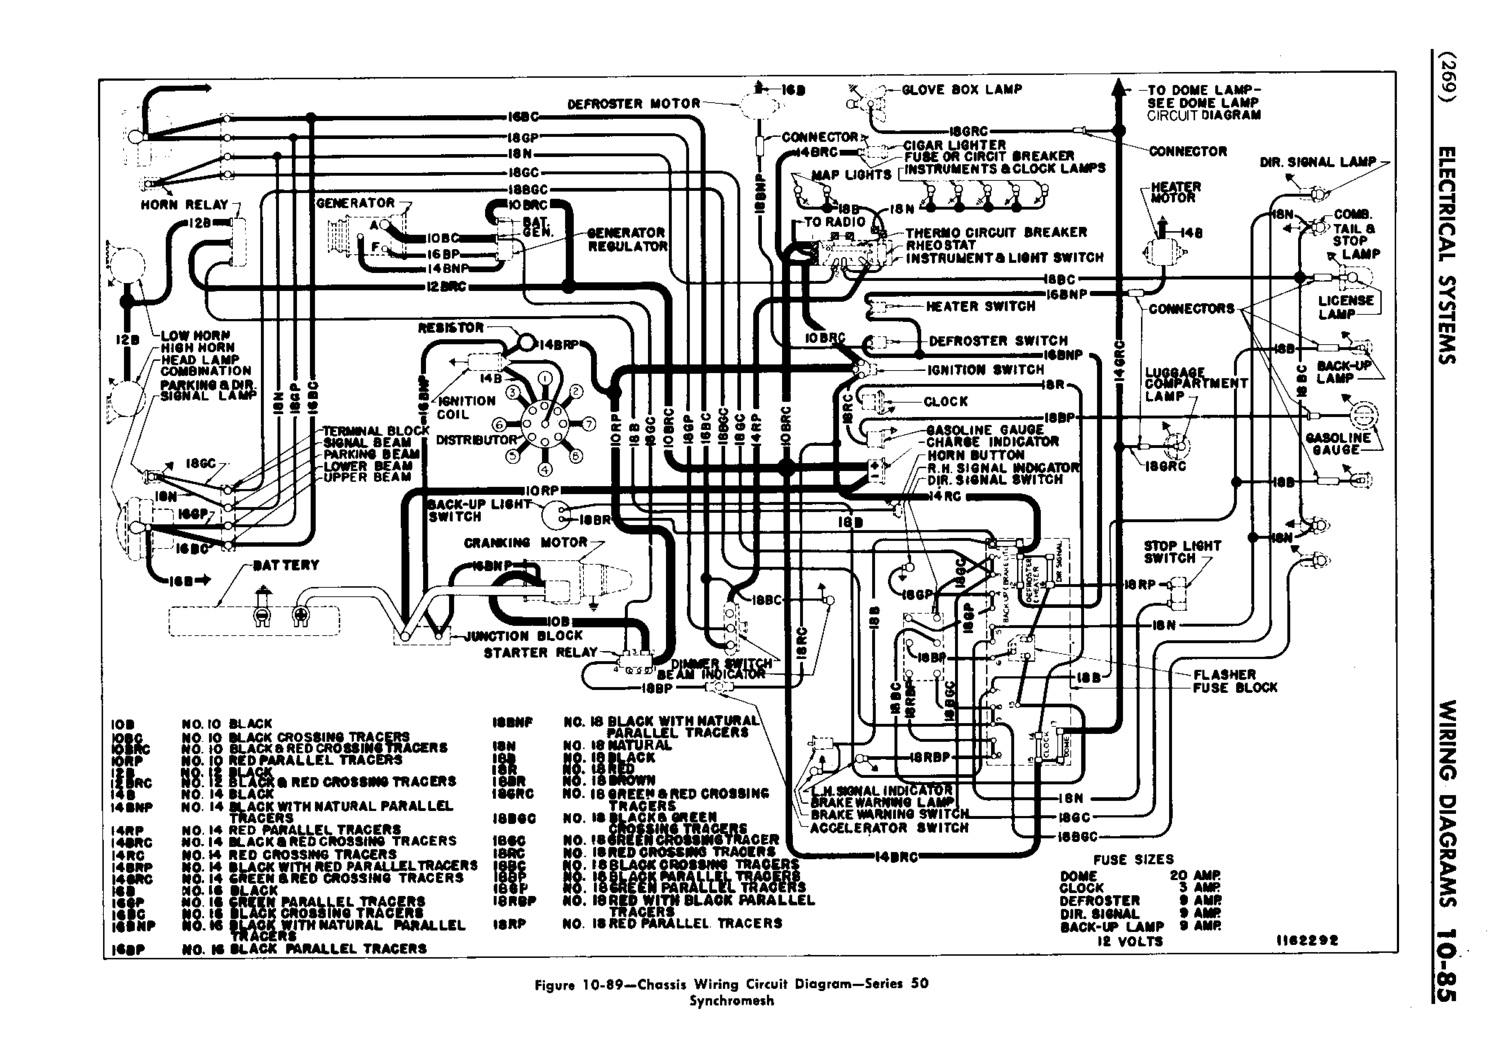 n_11 1953 Buick Shop Manual - Electrical Systems-086-086.jpg